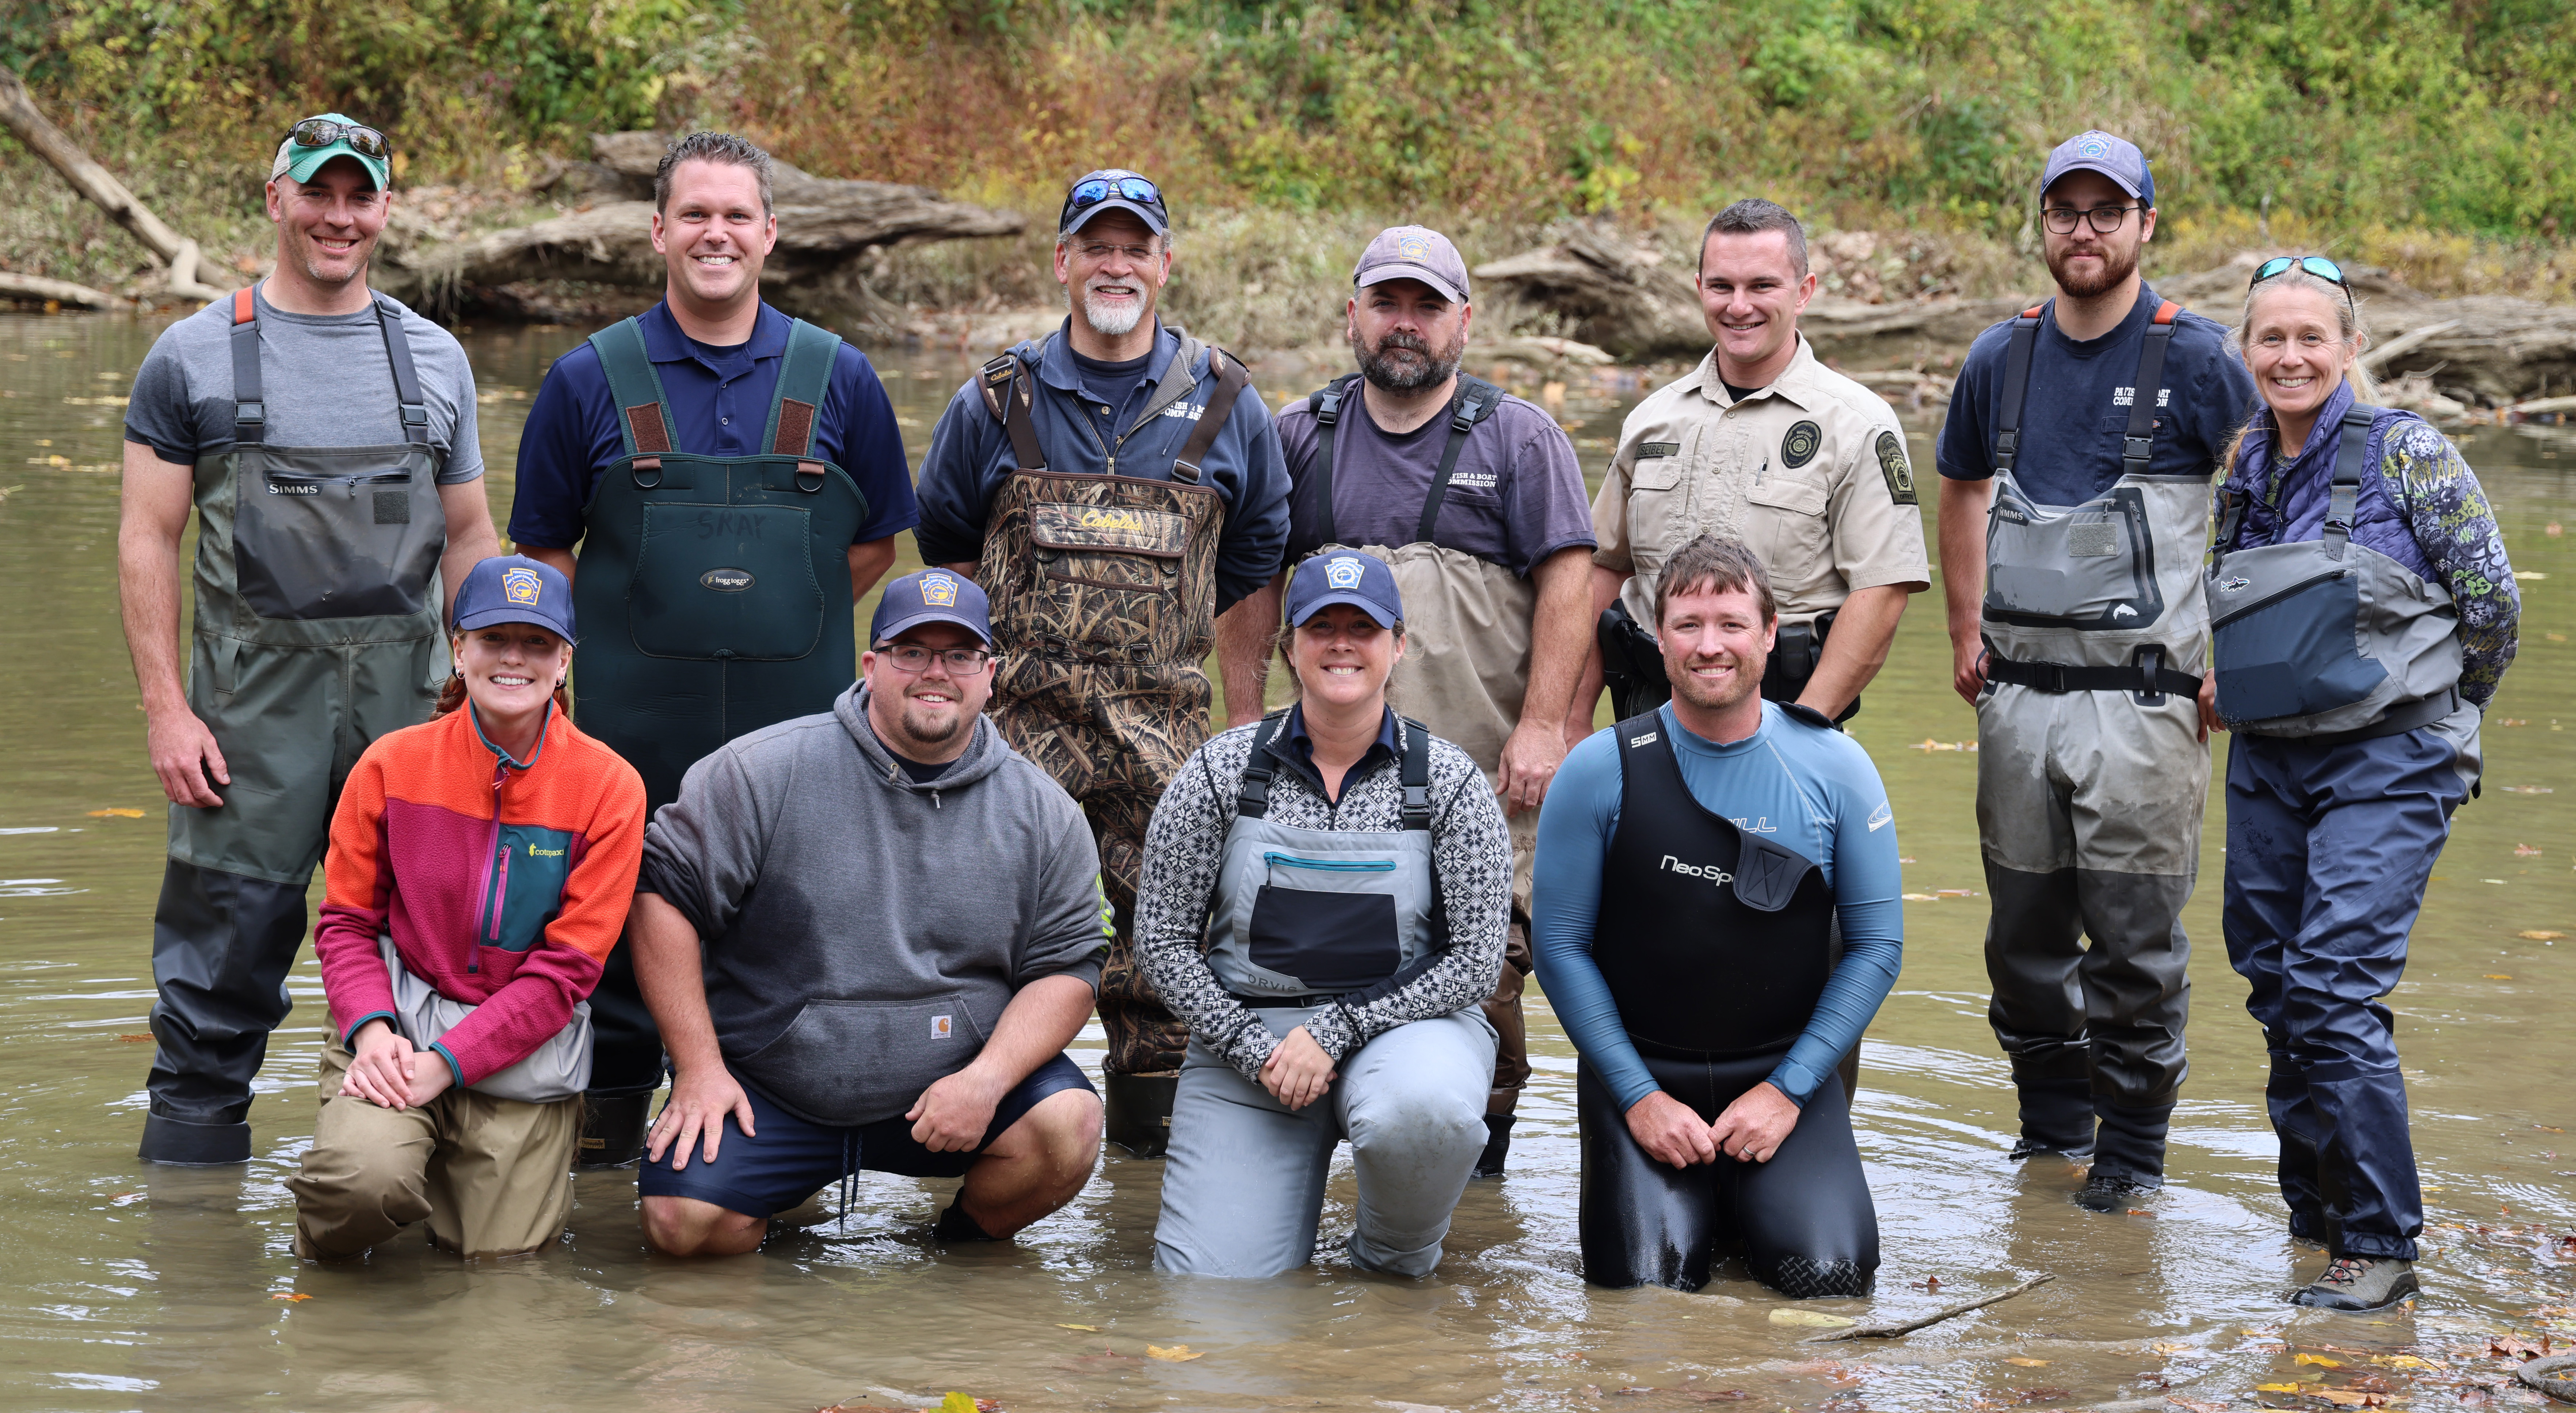 Group photo of staff from the Pennsylvania Fish and Boat Commission, Department of Environmental Protection and volunteers.